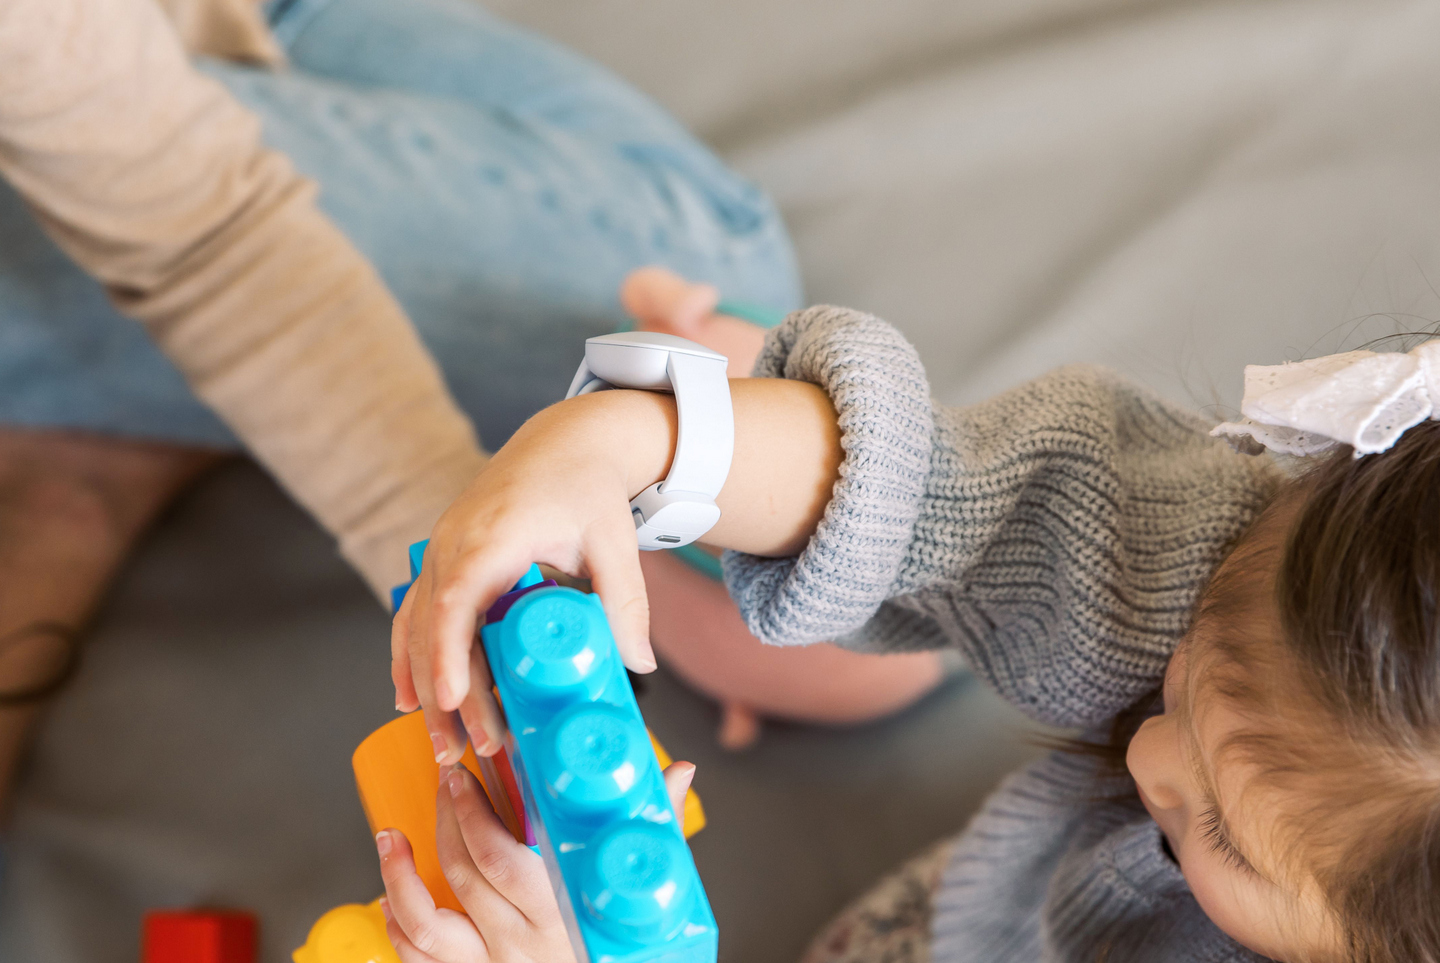 #This wearable for toddlers keeps them safe by letting their parents track their health and location